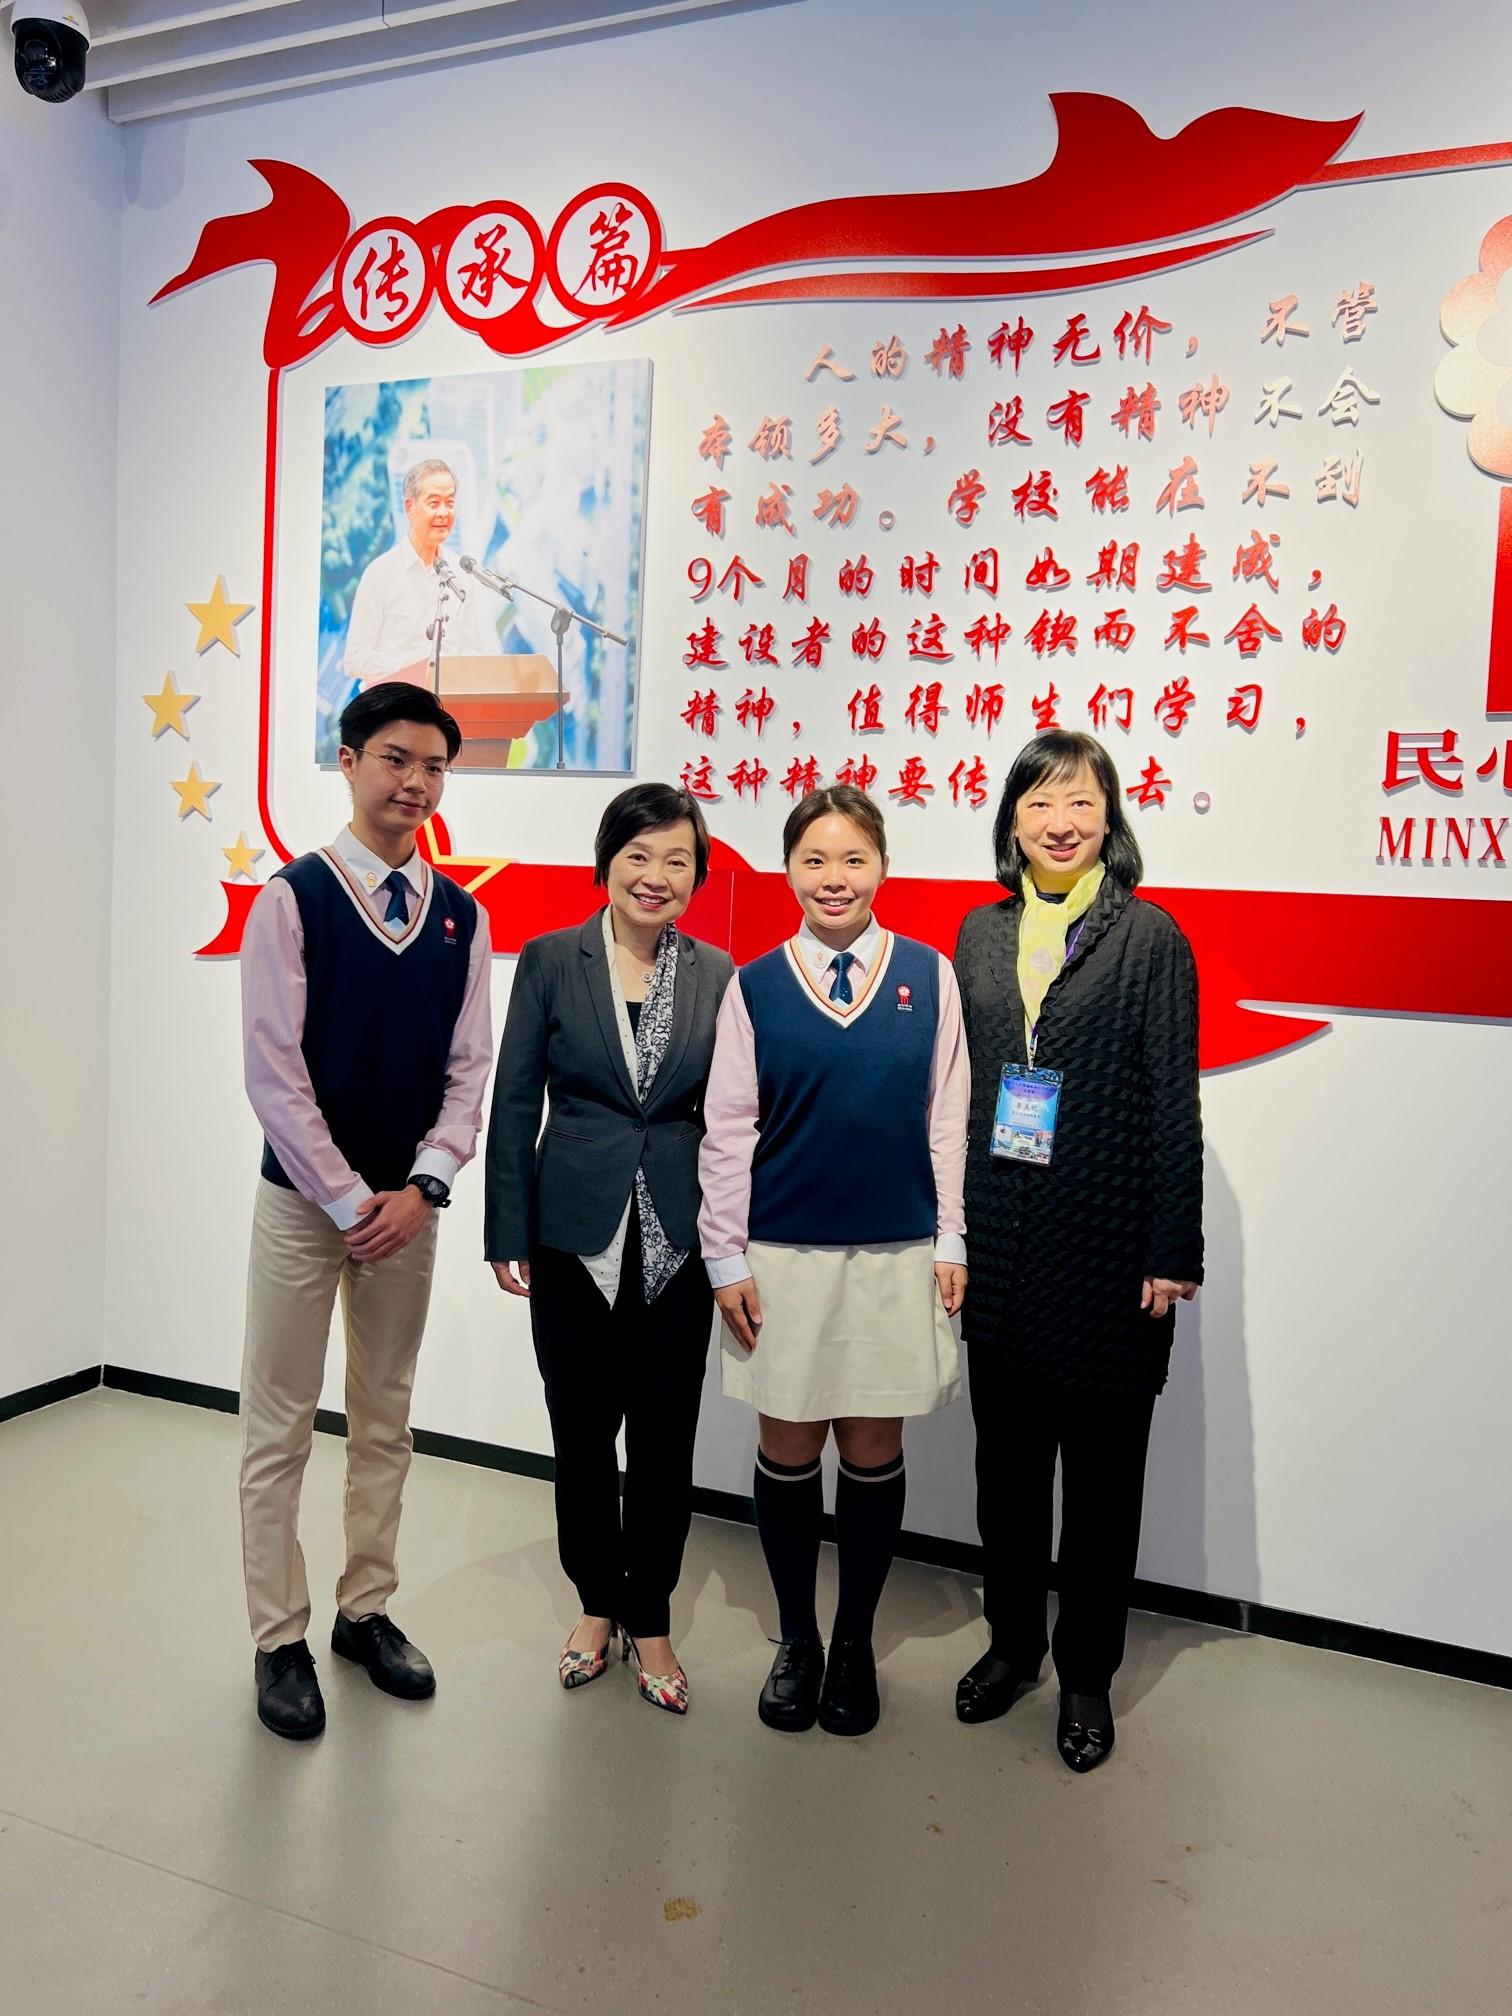 The Secretary for Education, Dr Choi Yuk-lin, continued to lead a delegation to visit Nansha, Guangzhou, and visited Minxin Hong Kong School (Guangzhou Nansha) today (March 10) to understand more about the study situation of Hong Kong students on the Mainland. Photo shows Dr Choi (second left), the Permanent Secretary for Education, Ms Michelle Li (first right), and student ambassadors.